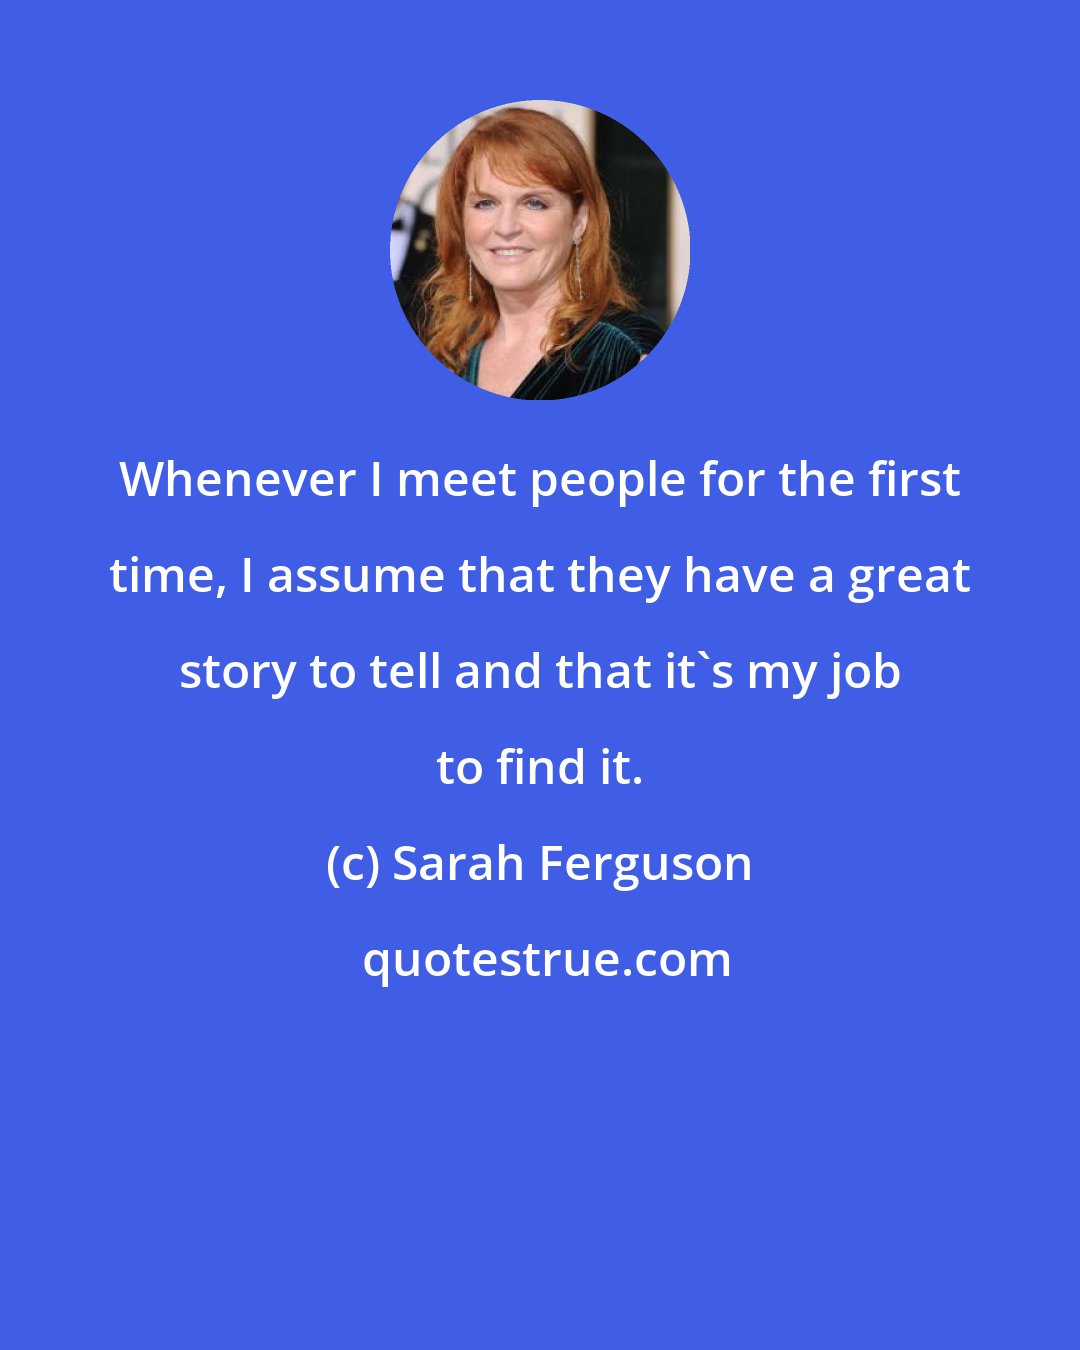 Sarah Ferguson: Whenever I meet people for the first time, I assume that they have a great story to tell and that it's my job to find it.